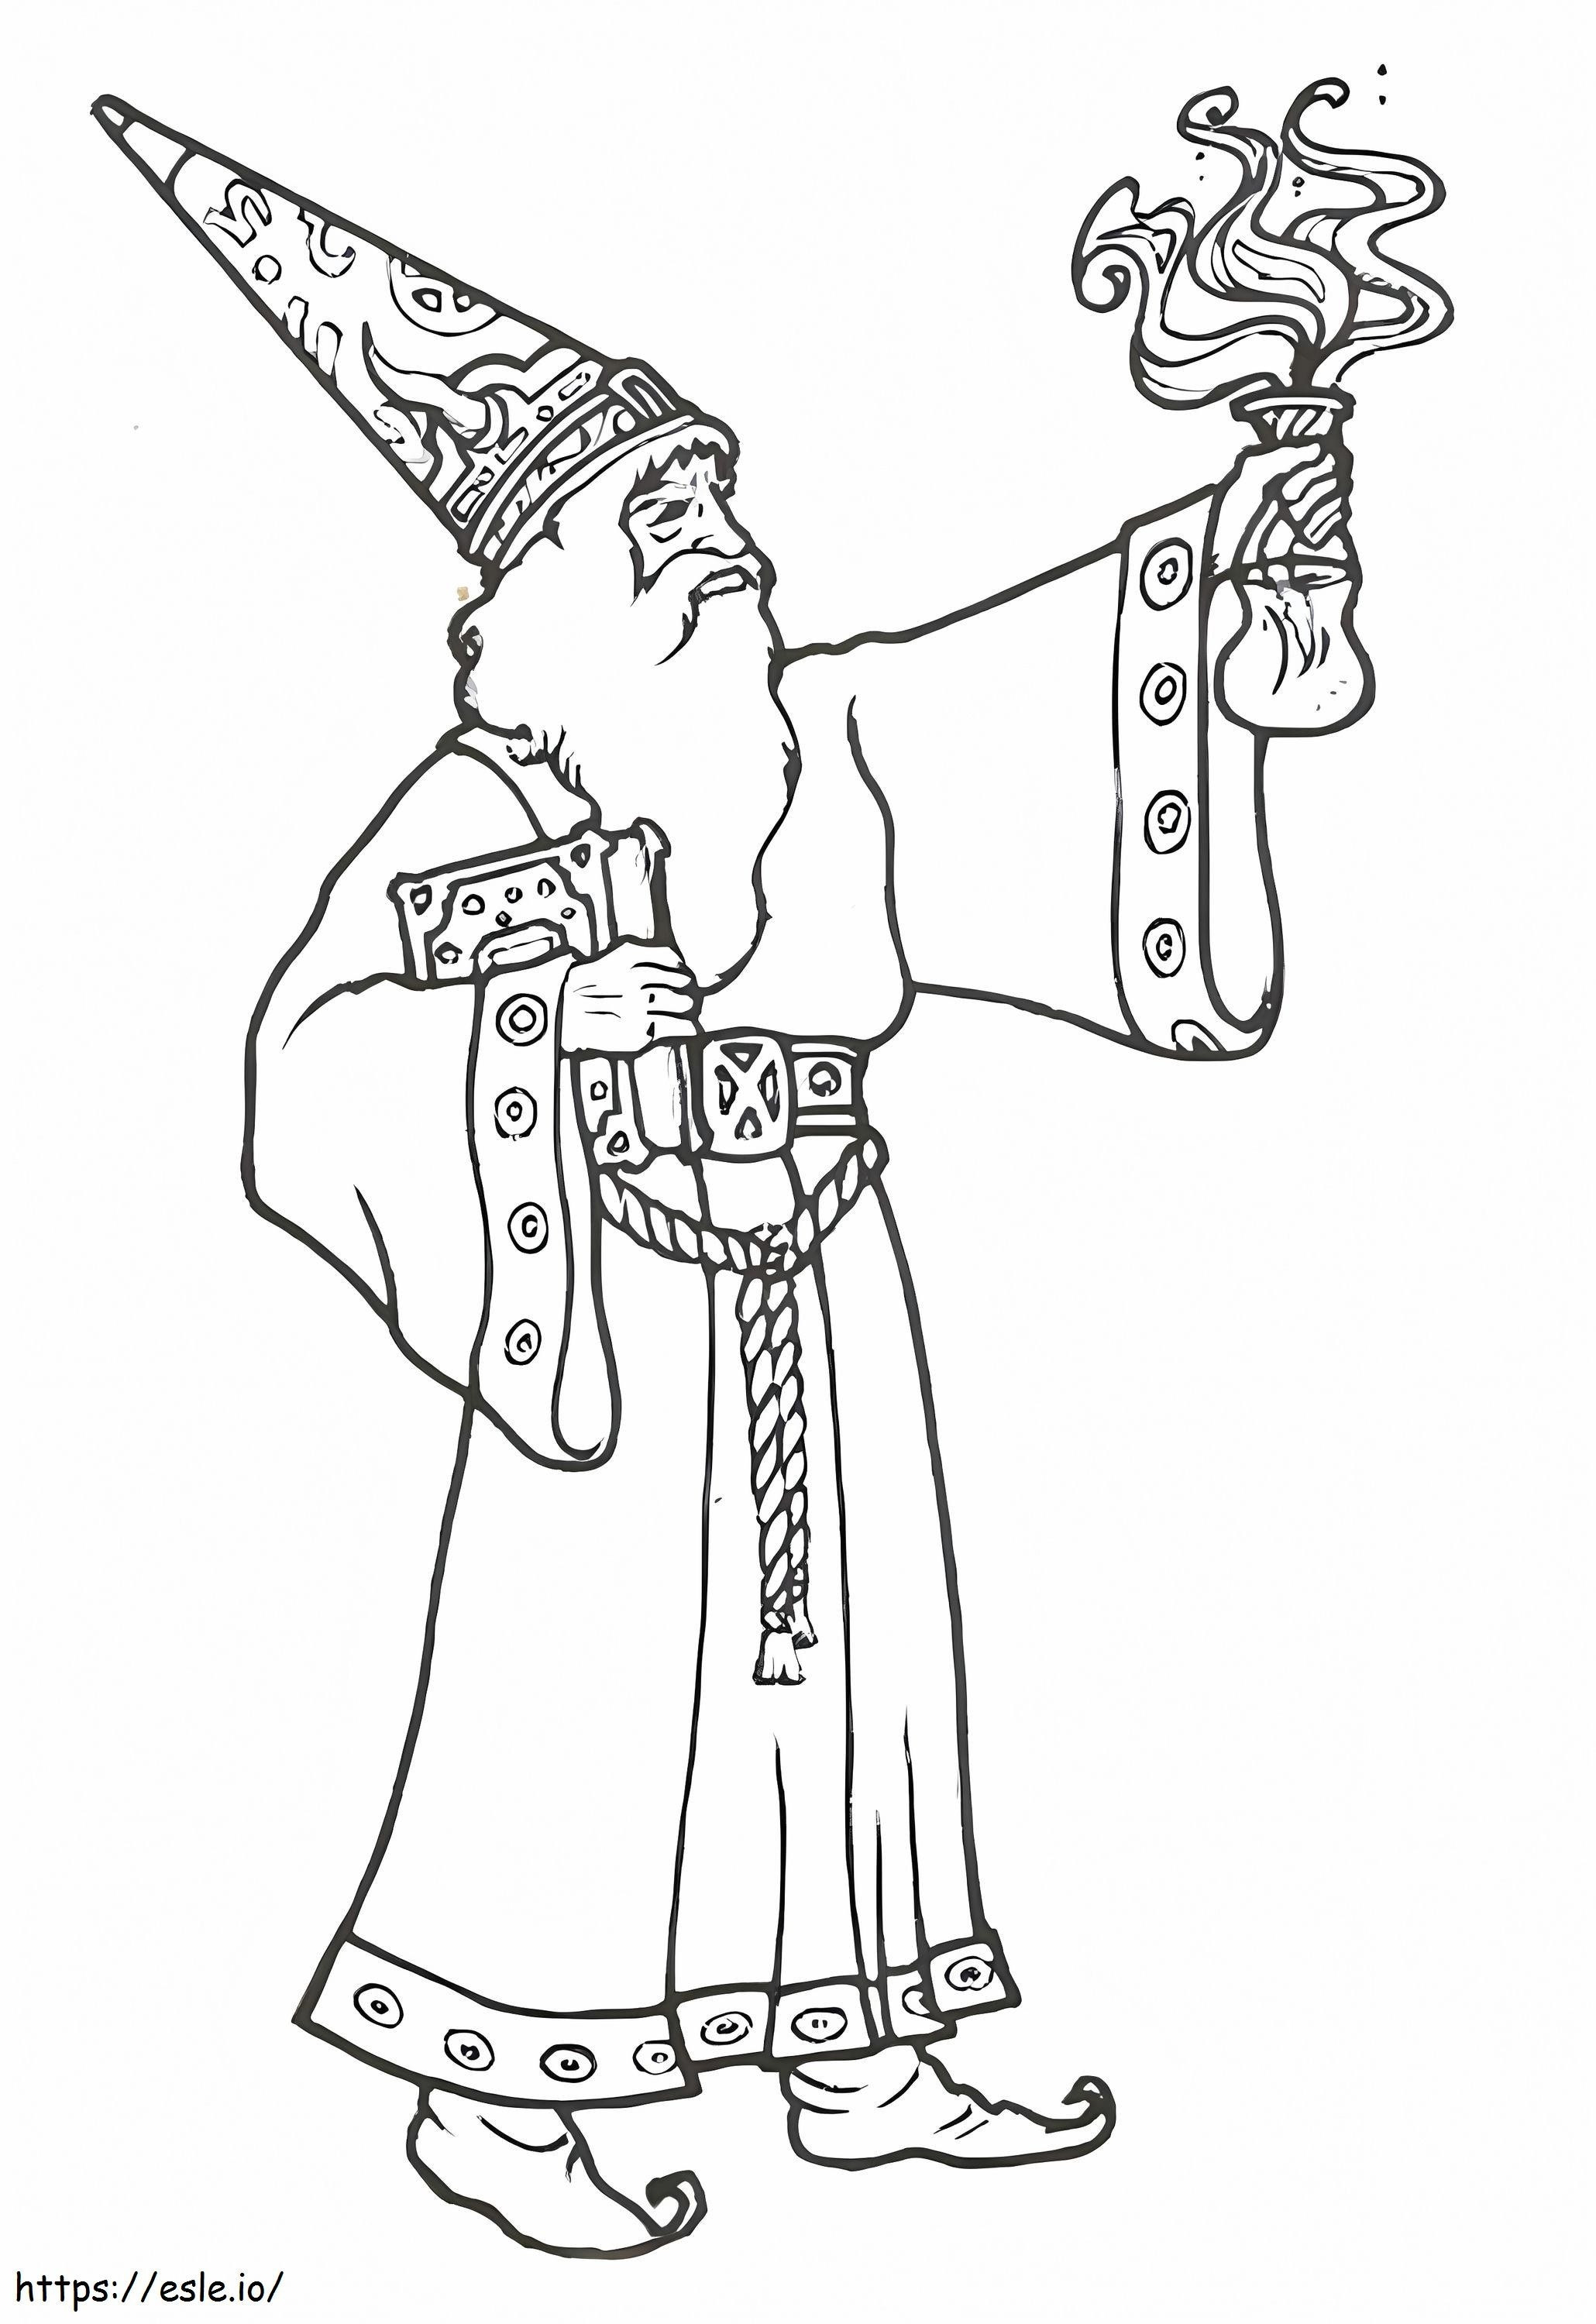 Cool Wizard coloring page